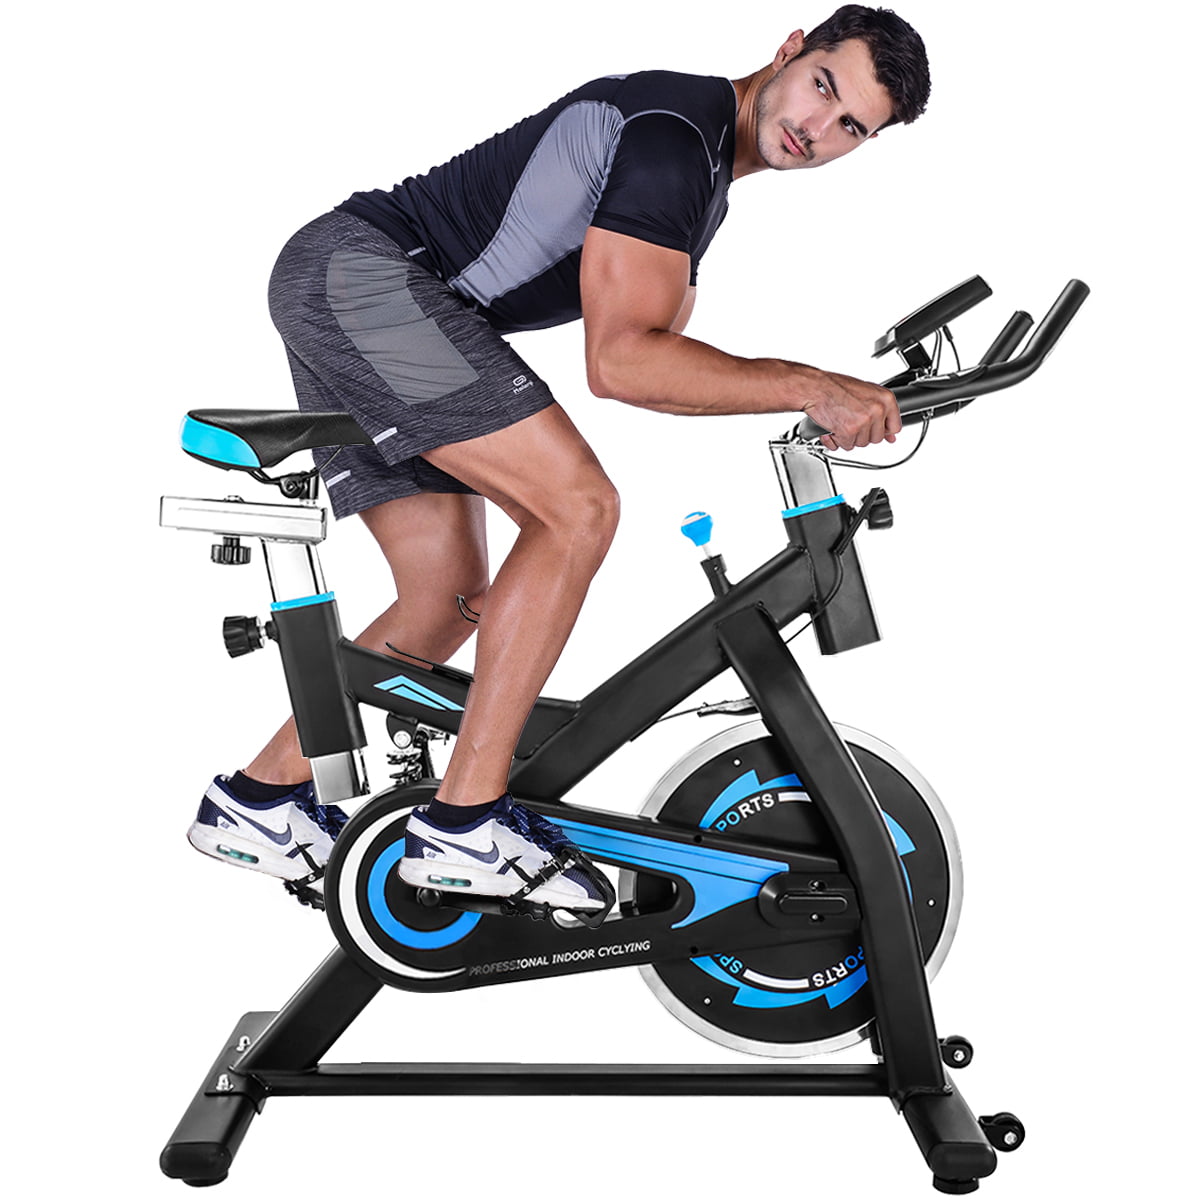 Indoor Cycle Exercise Bike, Stationary Bike Belt Drive Indoor Cycling